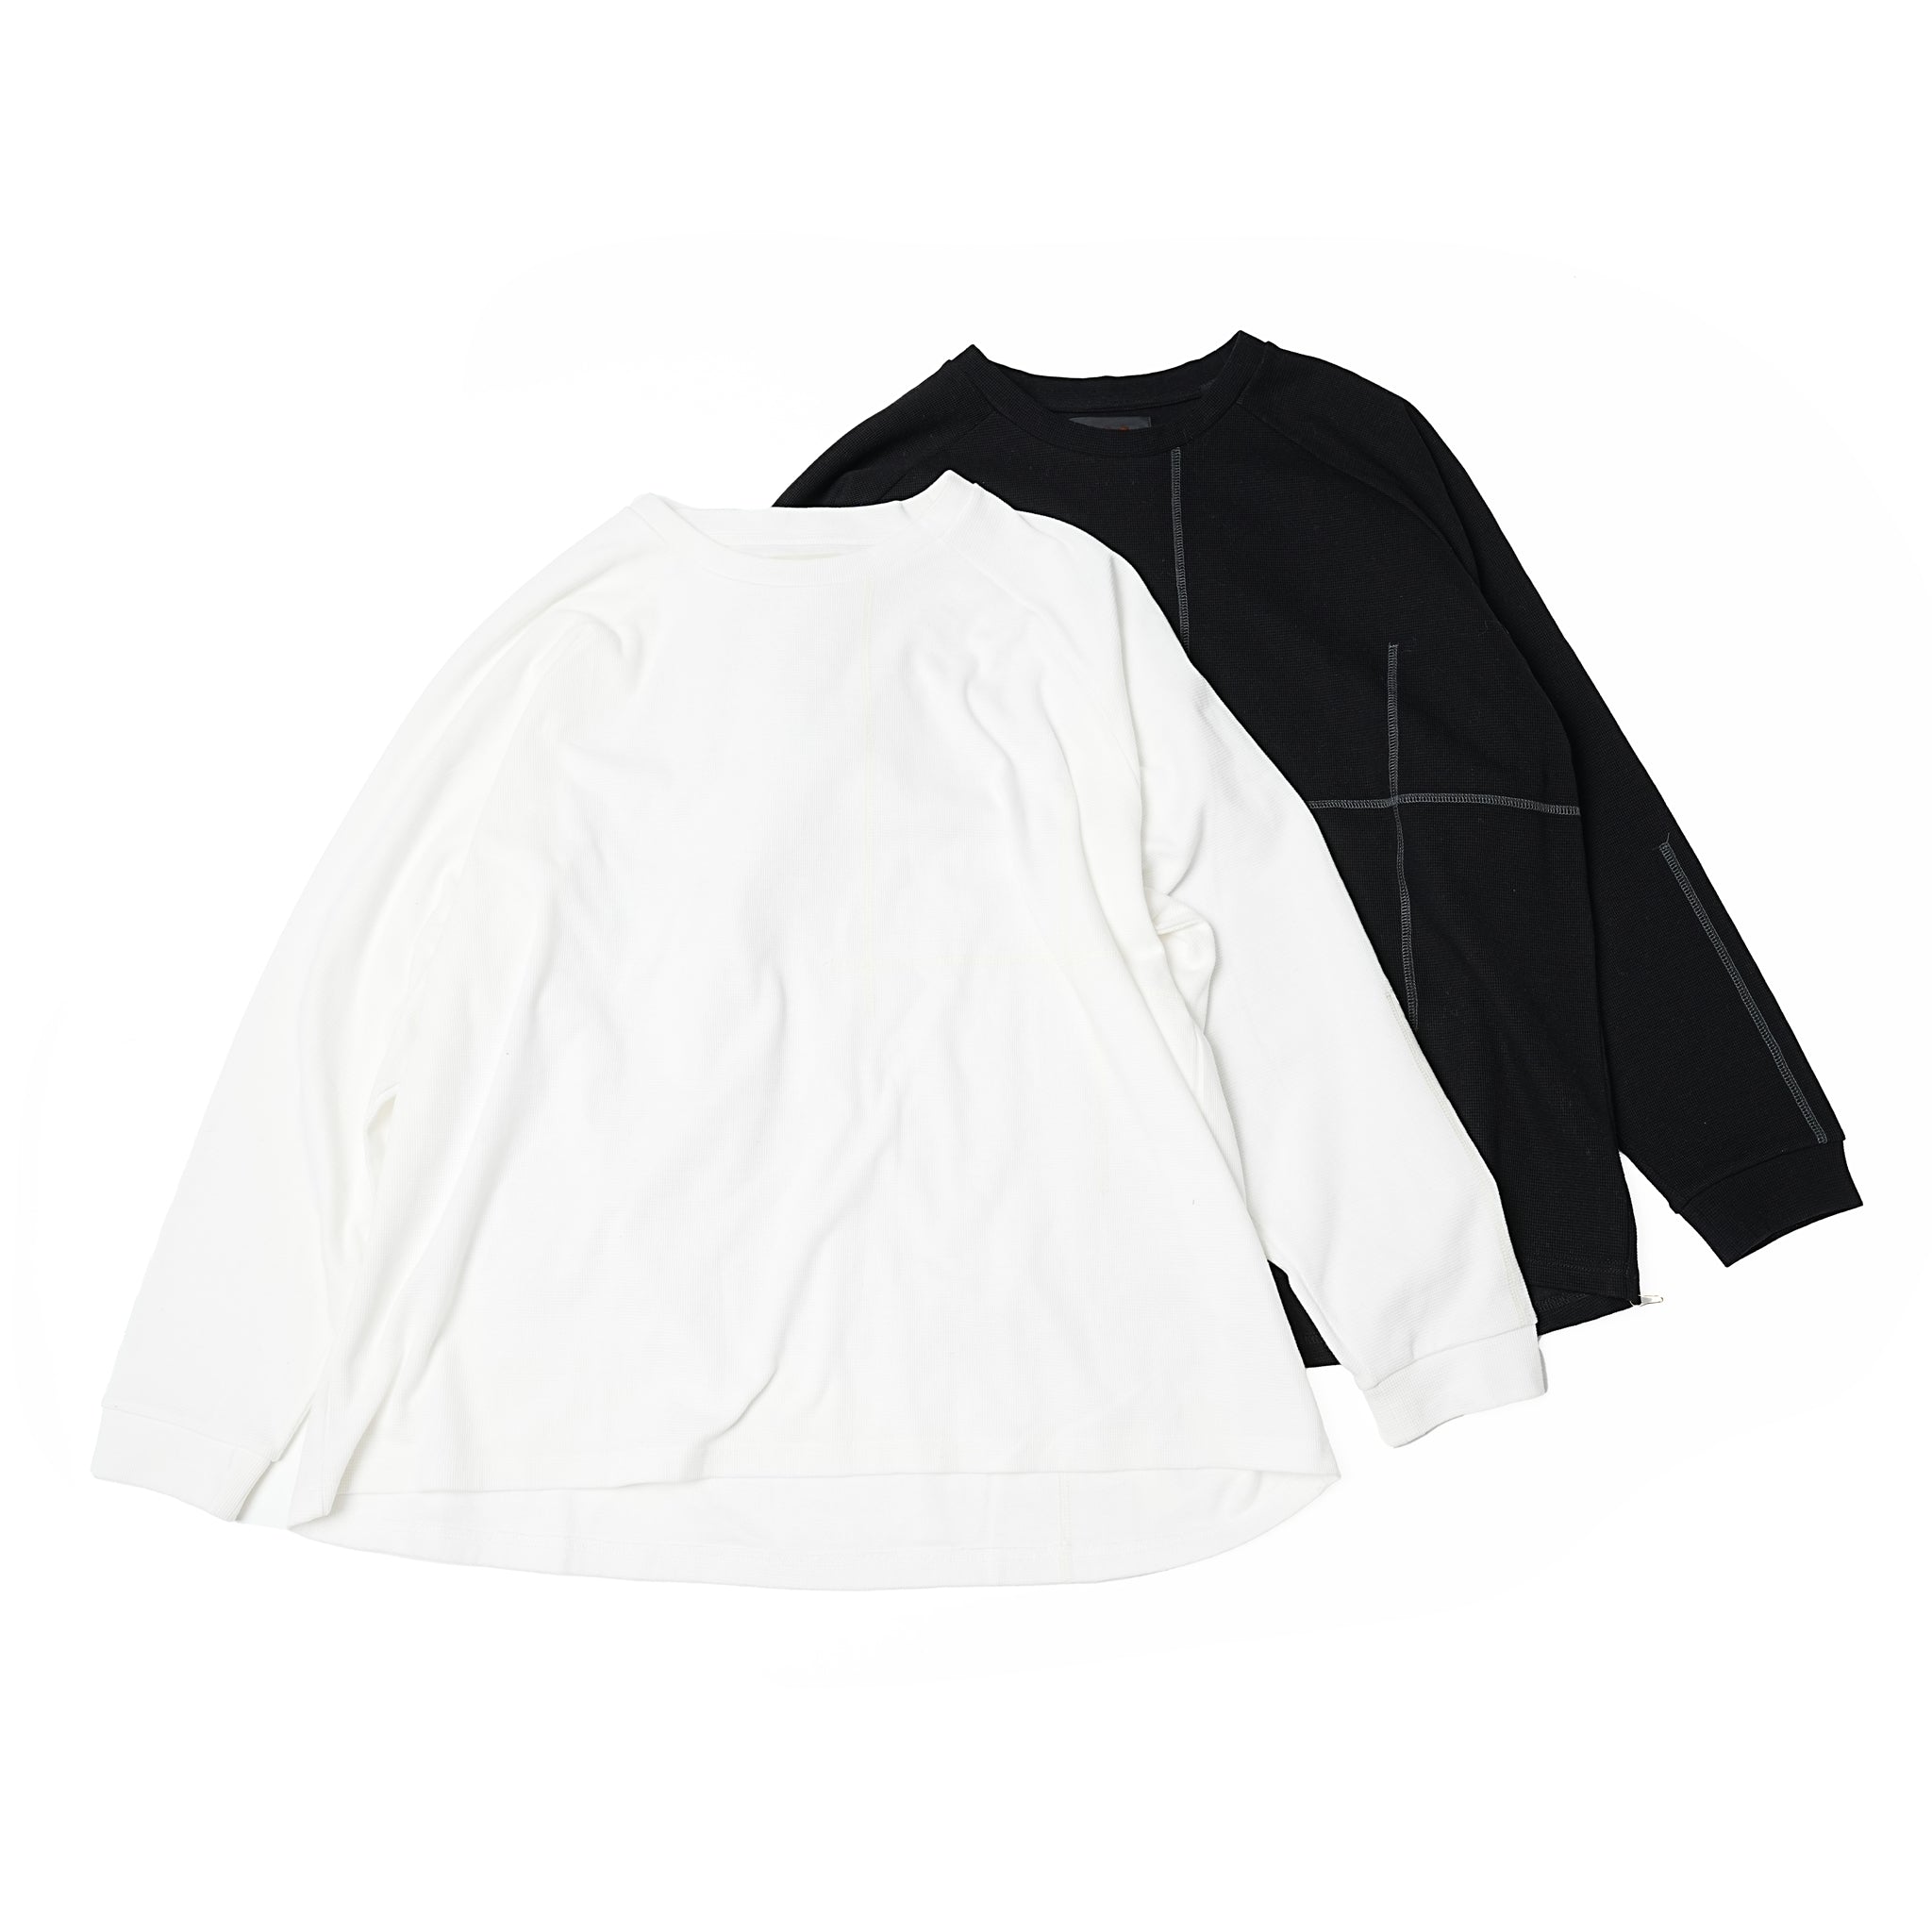 No:VOO-1165 | Name:D.STITCH THERMAL LT | Color:White/Black/Woodland【VOO_ヴォー】【入荷予定アイテム・入荷連絡可能】